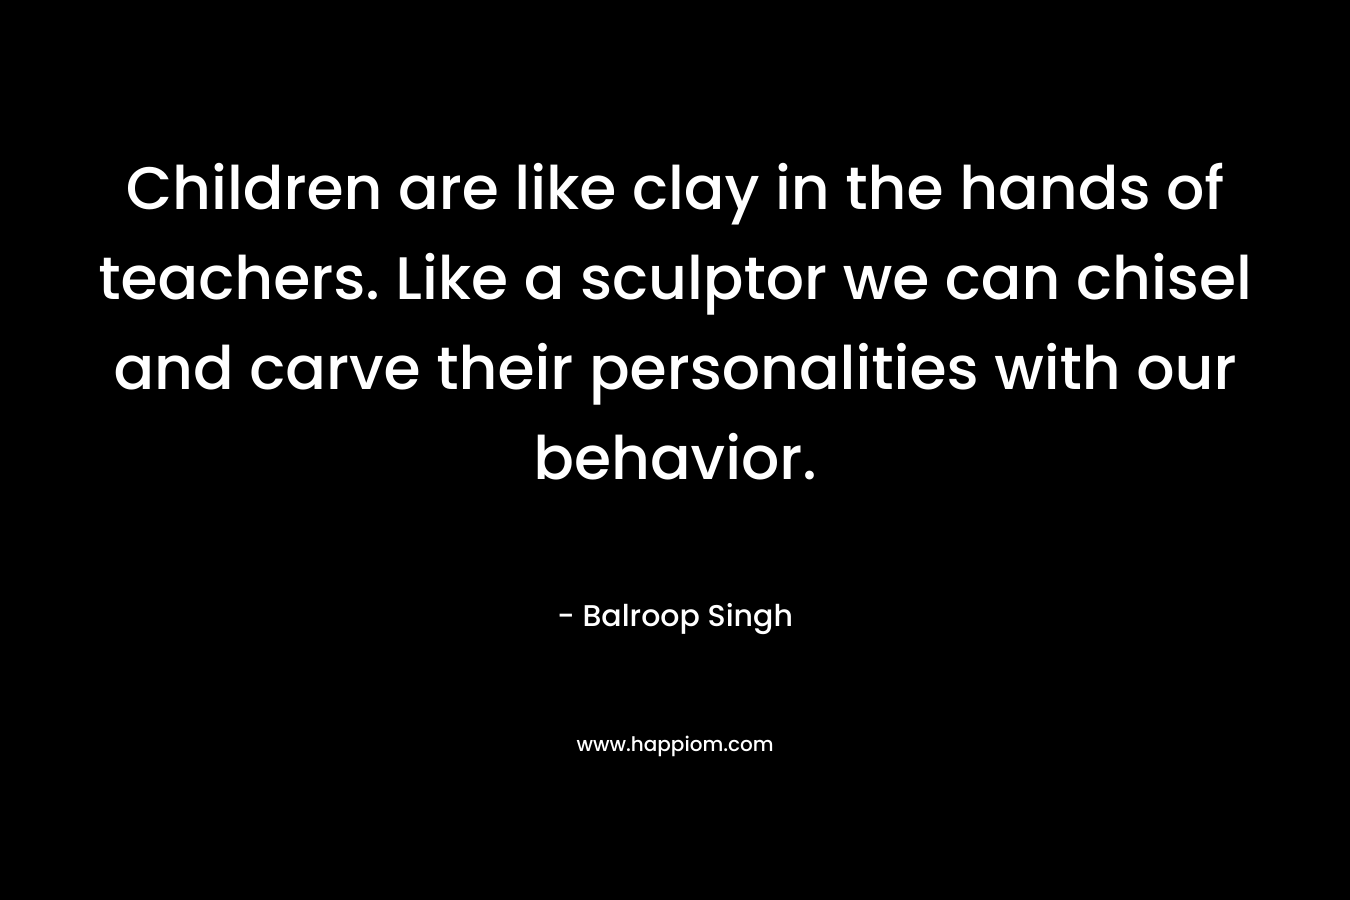 Children are like clay in the hands of teachers. Like a sculptor we can chisel and carve their personalities with our behavior.